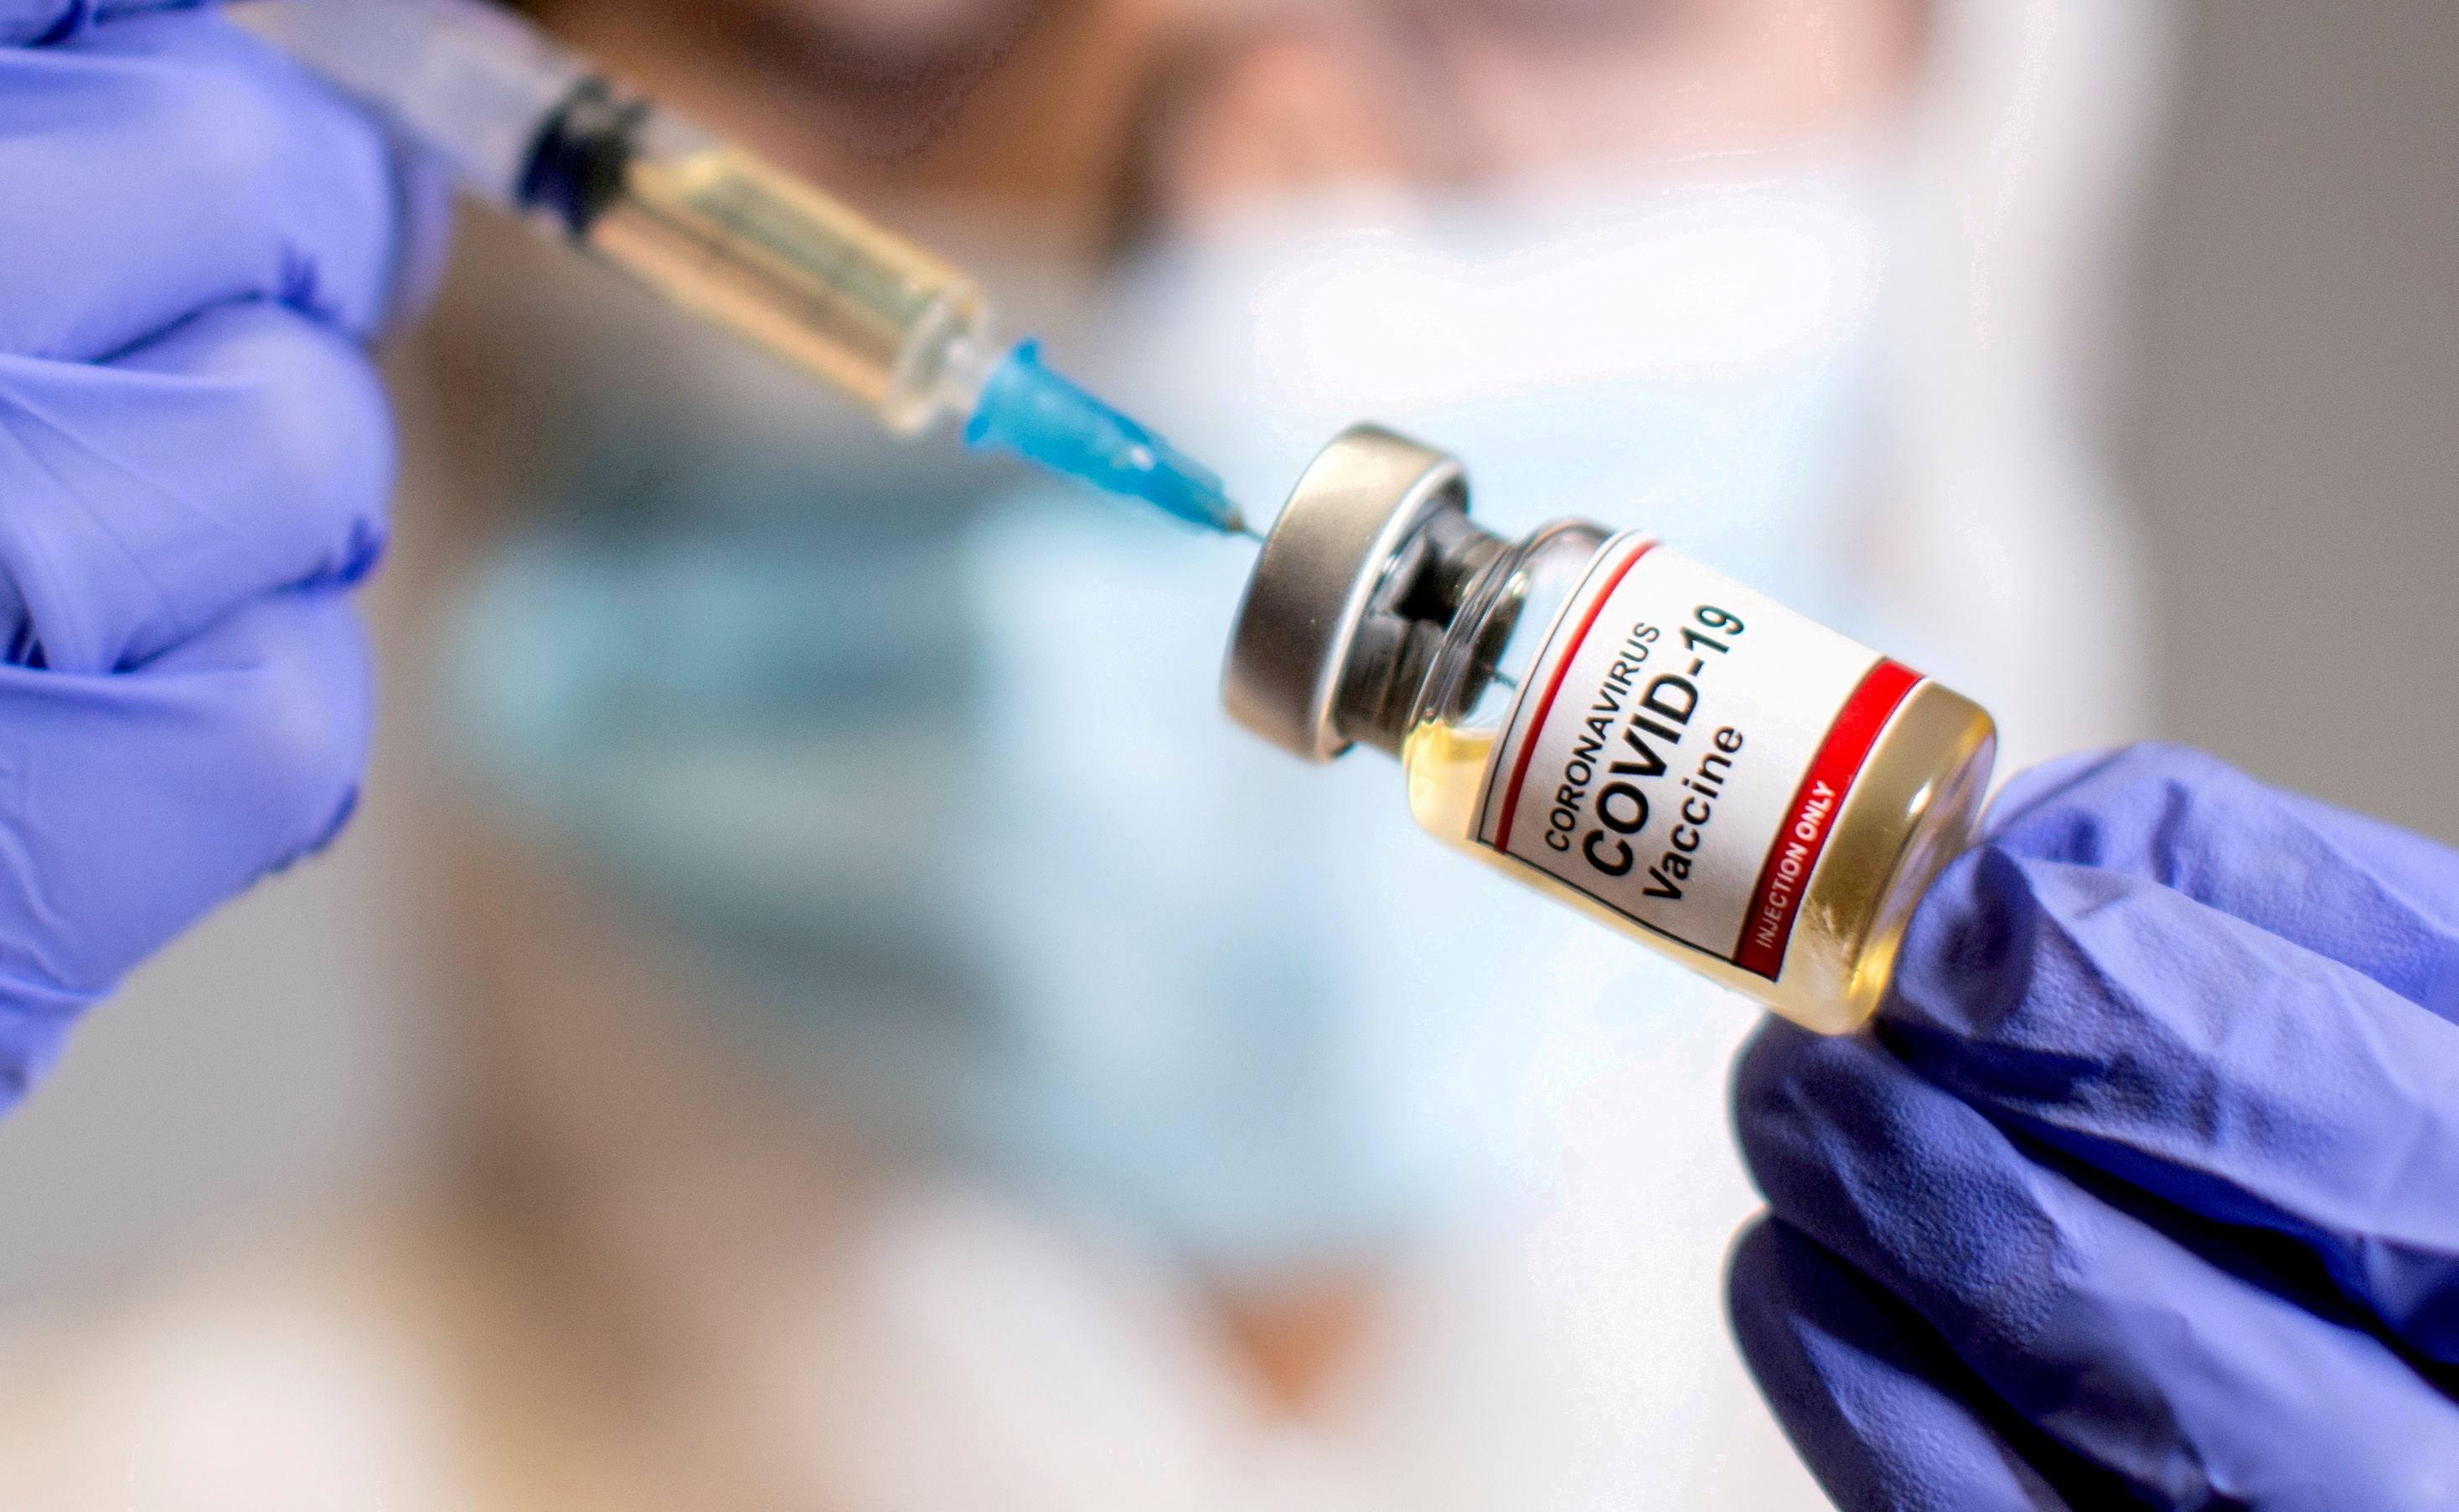 FILE PHOTO: A woman holds a small bottle labelled with a "Coronavirus COVID-19 Vaccine" sticker and a medical syringe in this illustration taken  October 30, 2020. REUTERS/Dado Ruvic